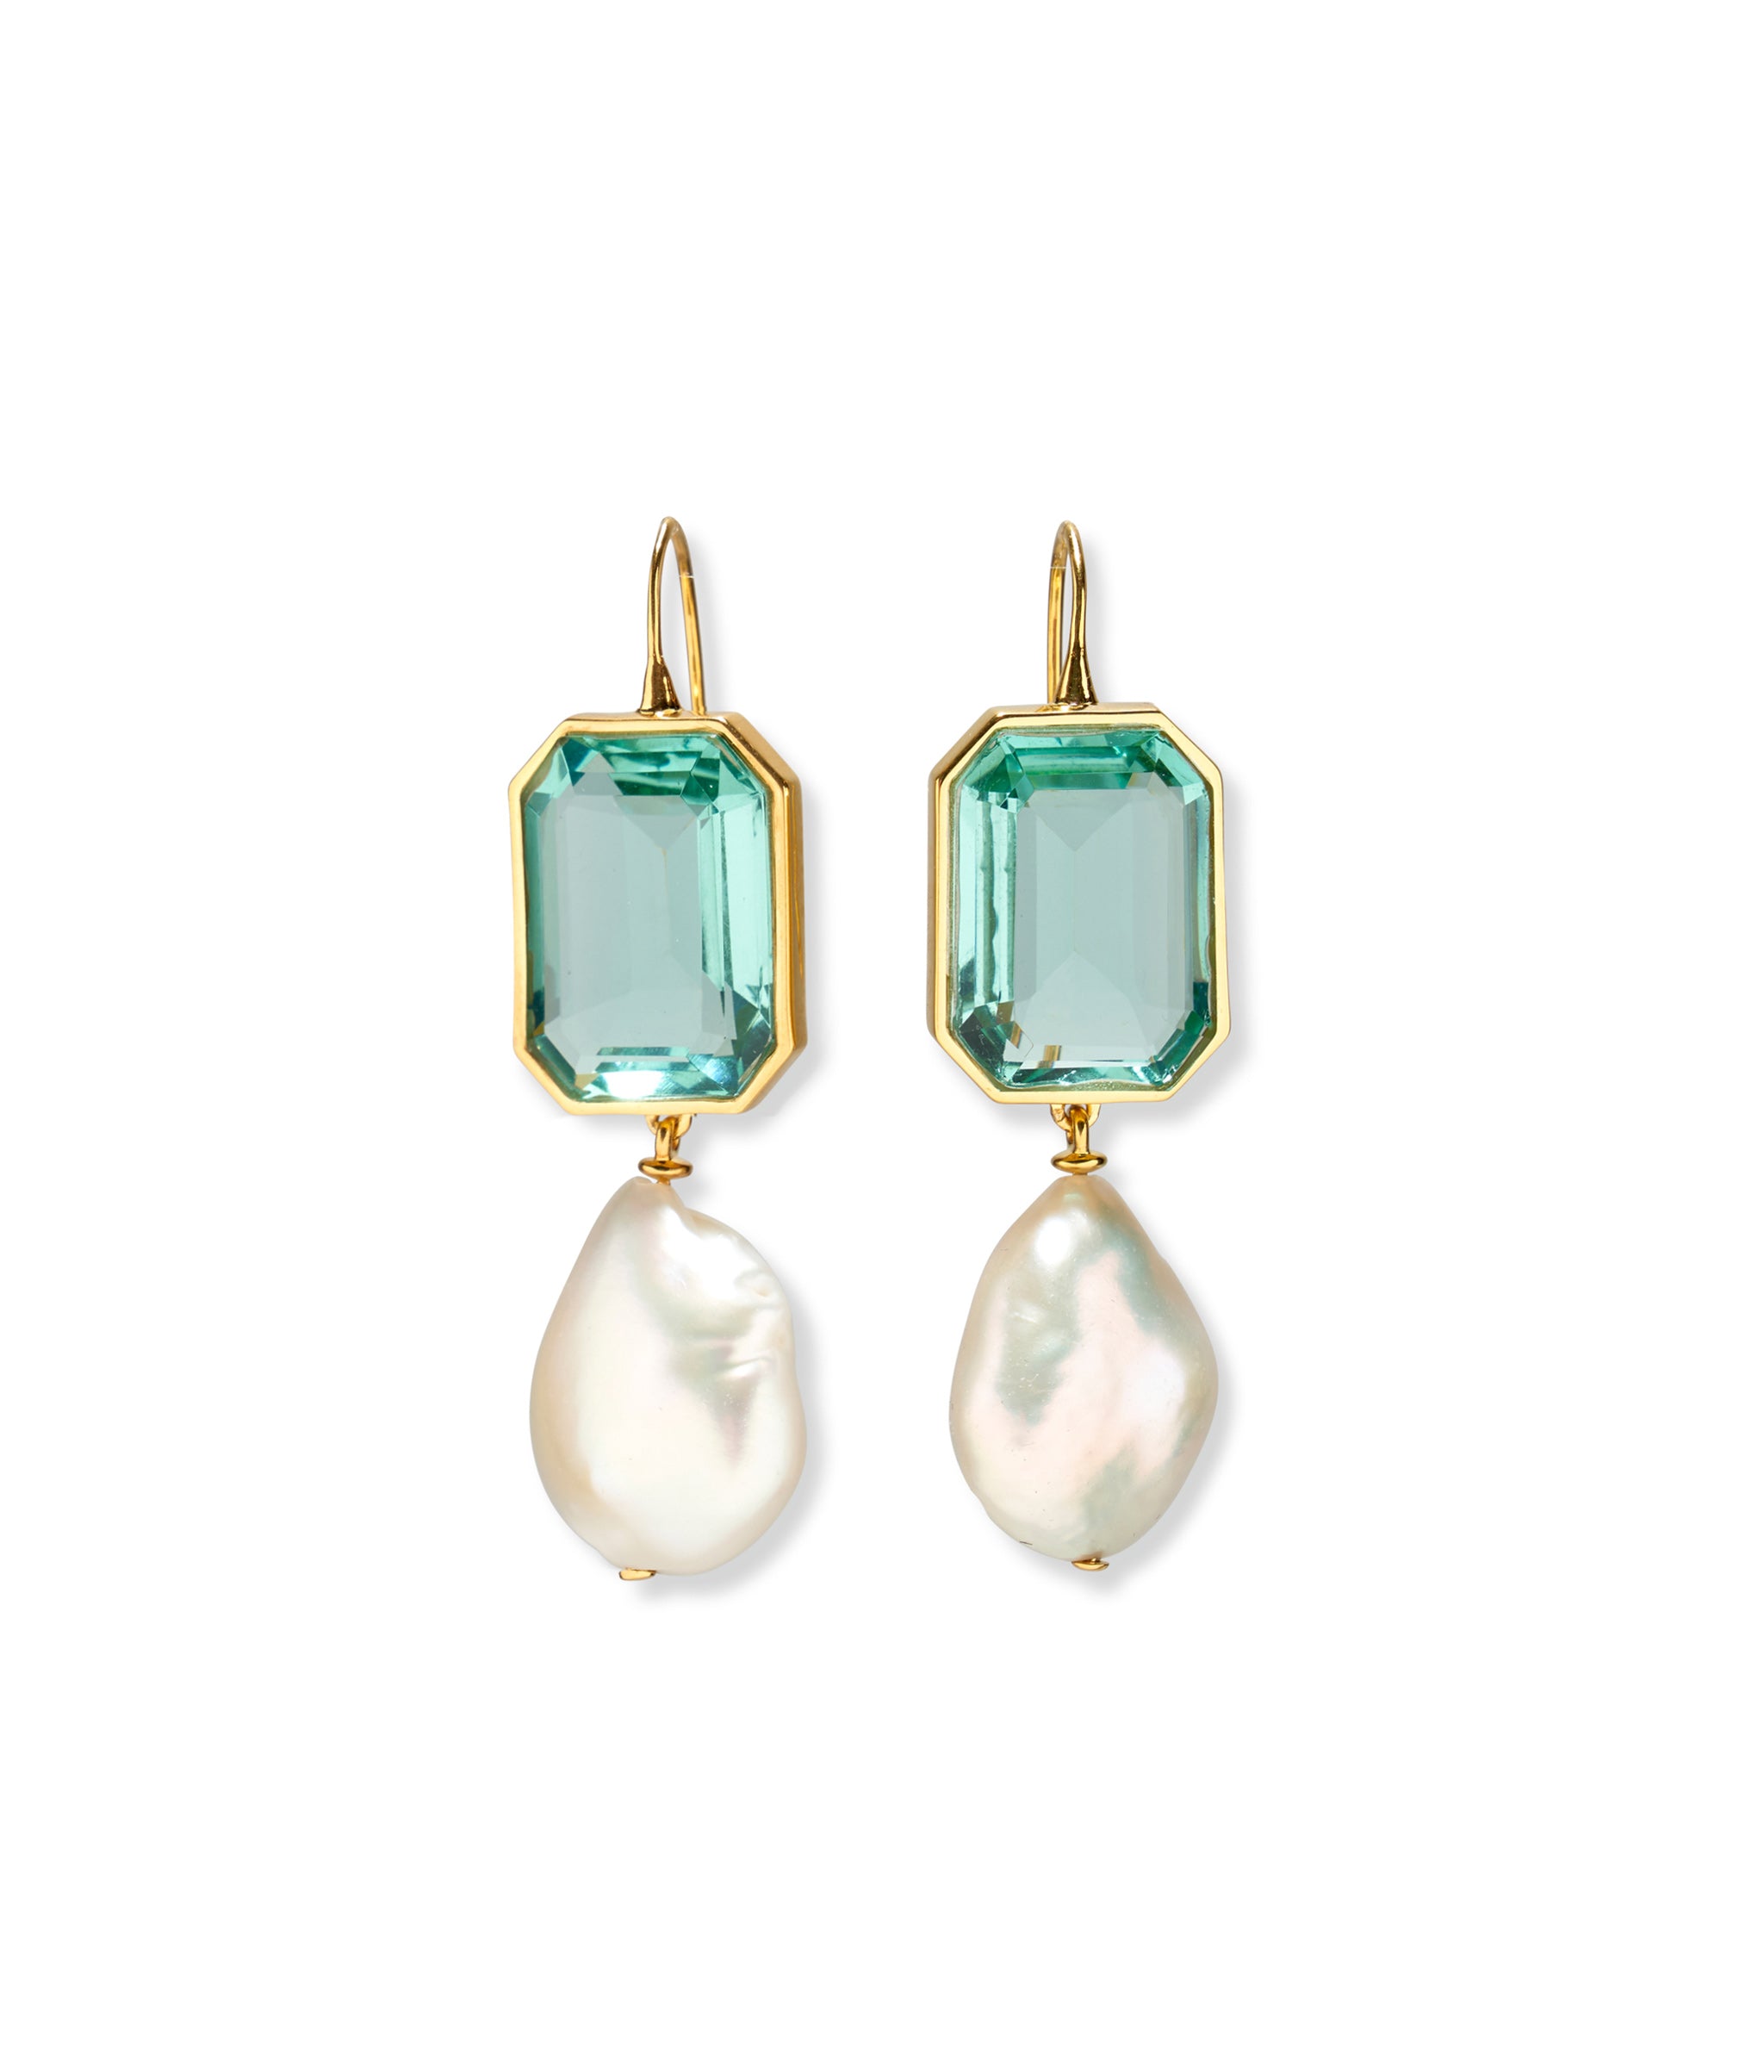 Aegean Earrings. Rectangle drop earrings with aqua-colored quartz baguette stones and hanging baroque freshwater pearls.